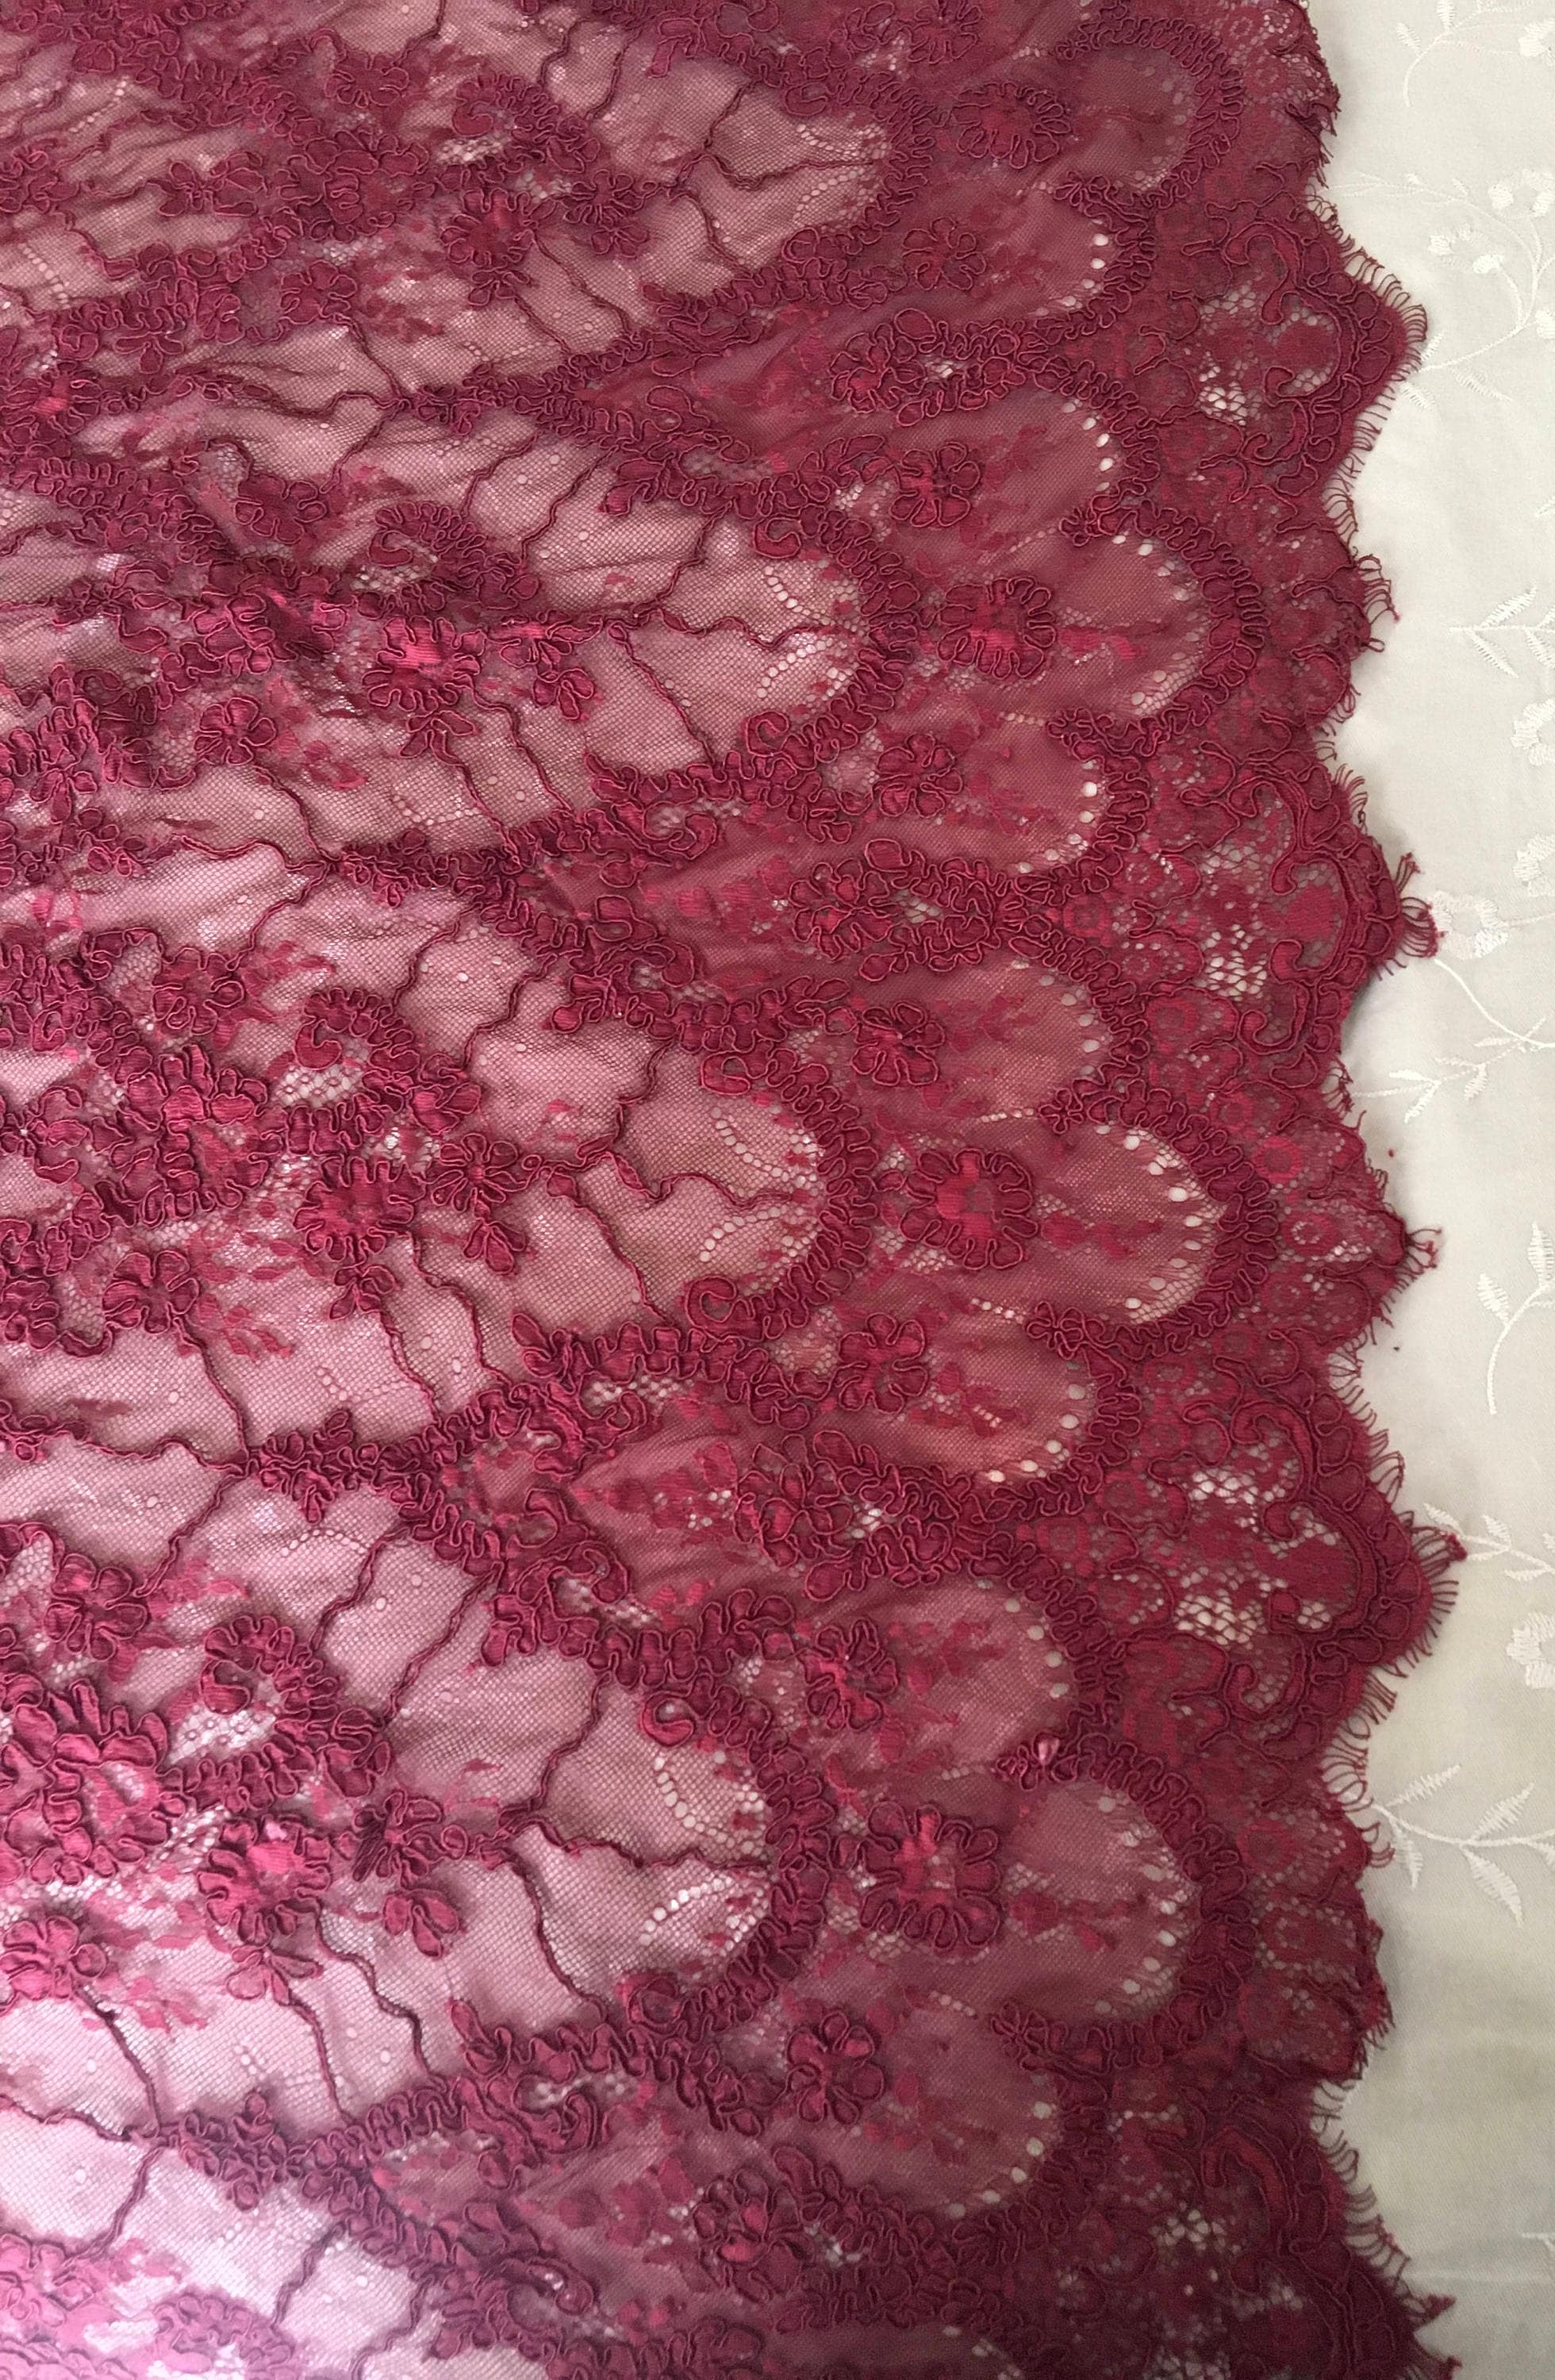 SALE Ox Blood Lace by the Yard Designer Lace by the Yard | Etsy